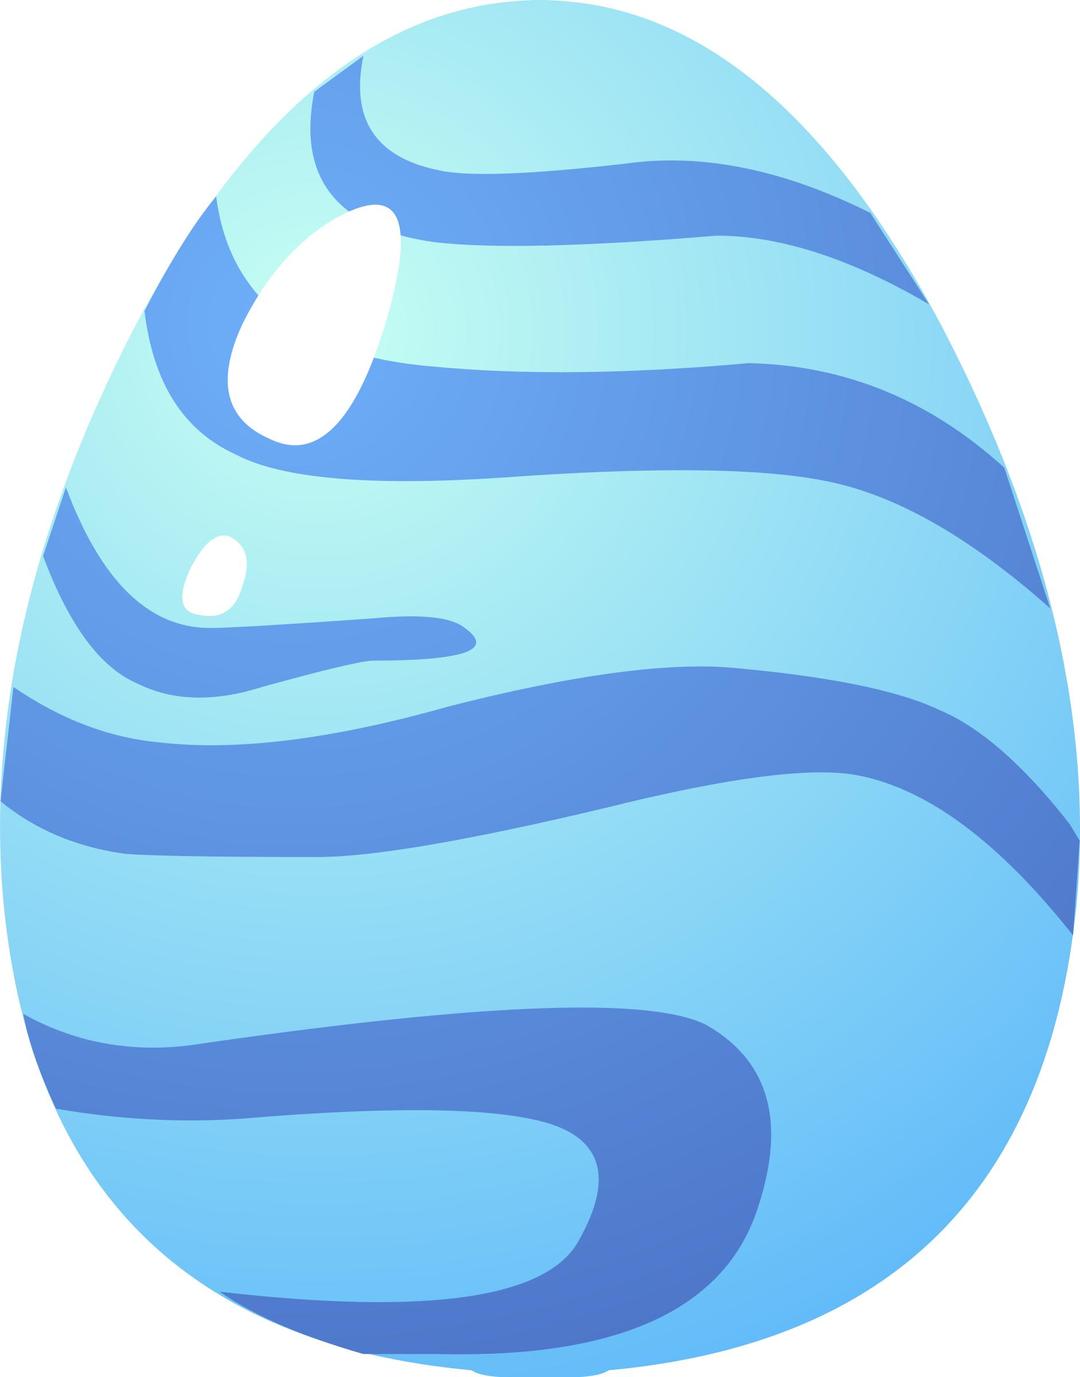 Misc Butterfly Egg png transparent